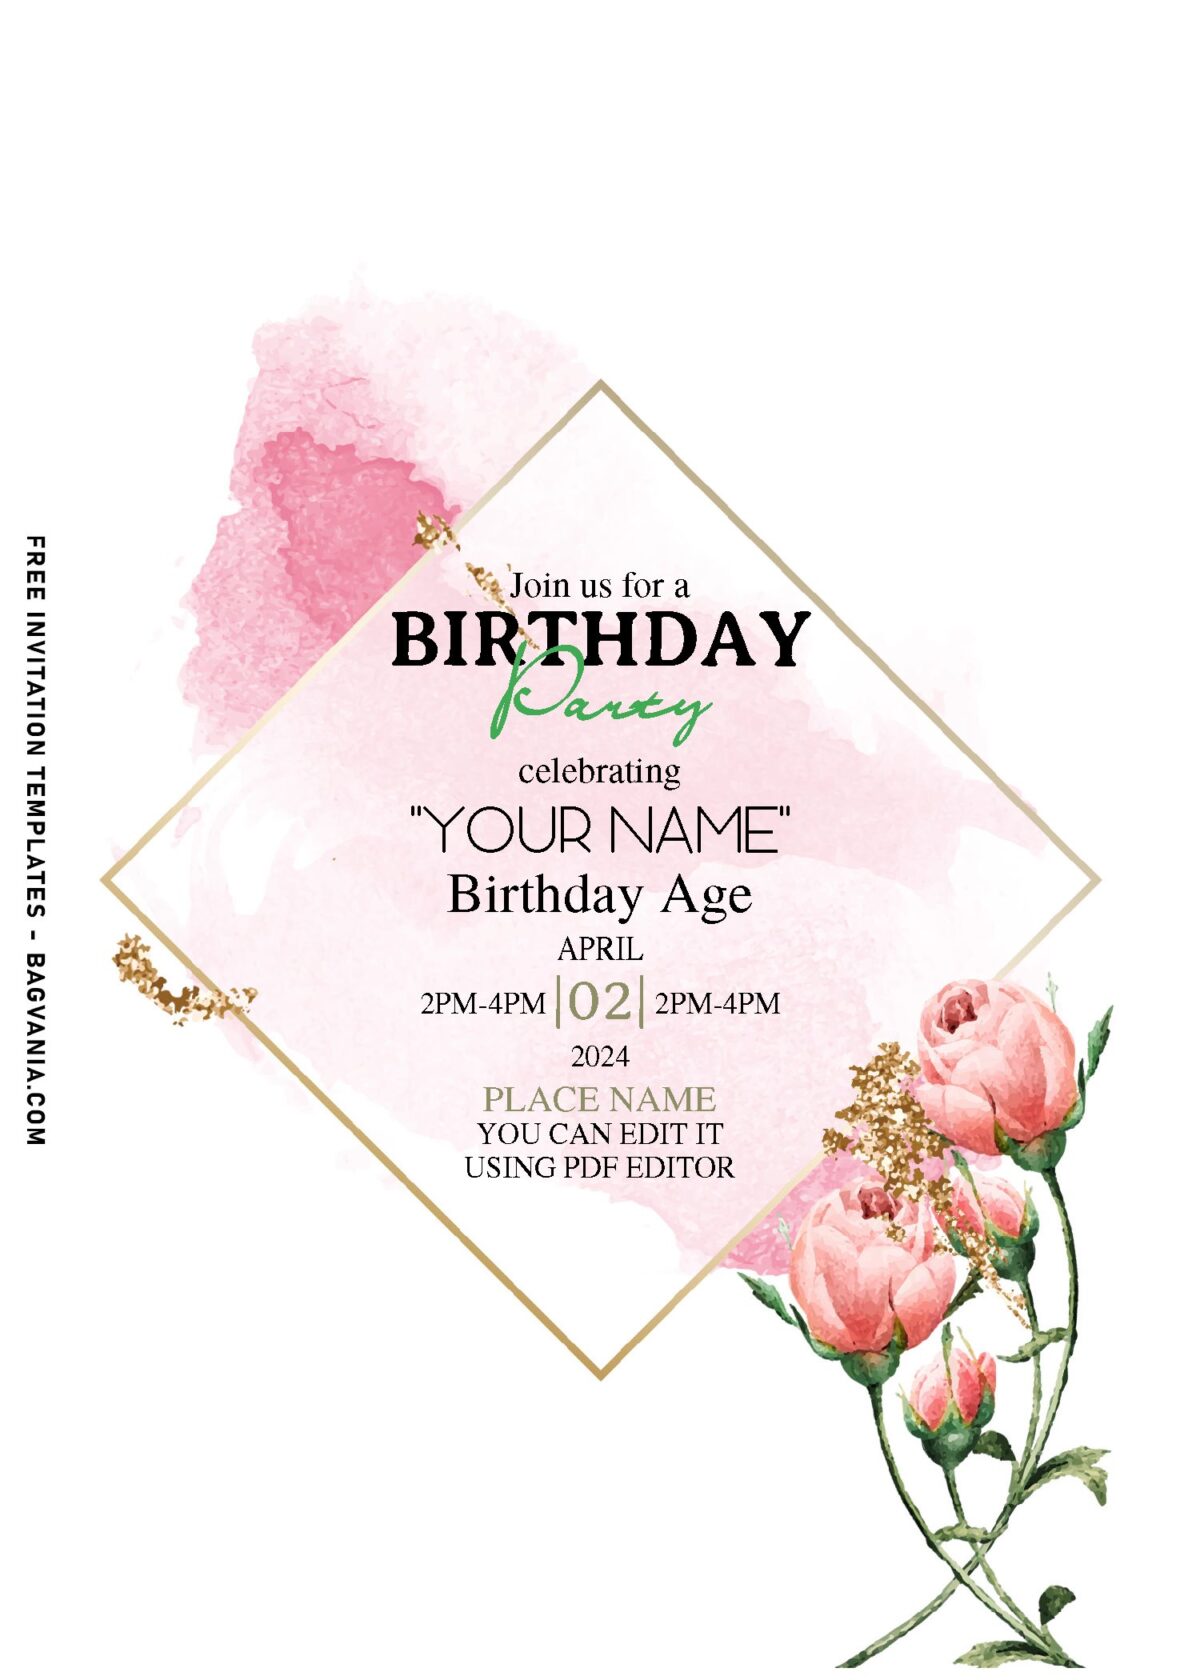 (Free Editable PDF) Splendid Blush Rose Garden Birthday Party Invitation Templates with blush pink watercolor accent